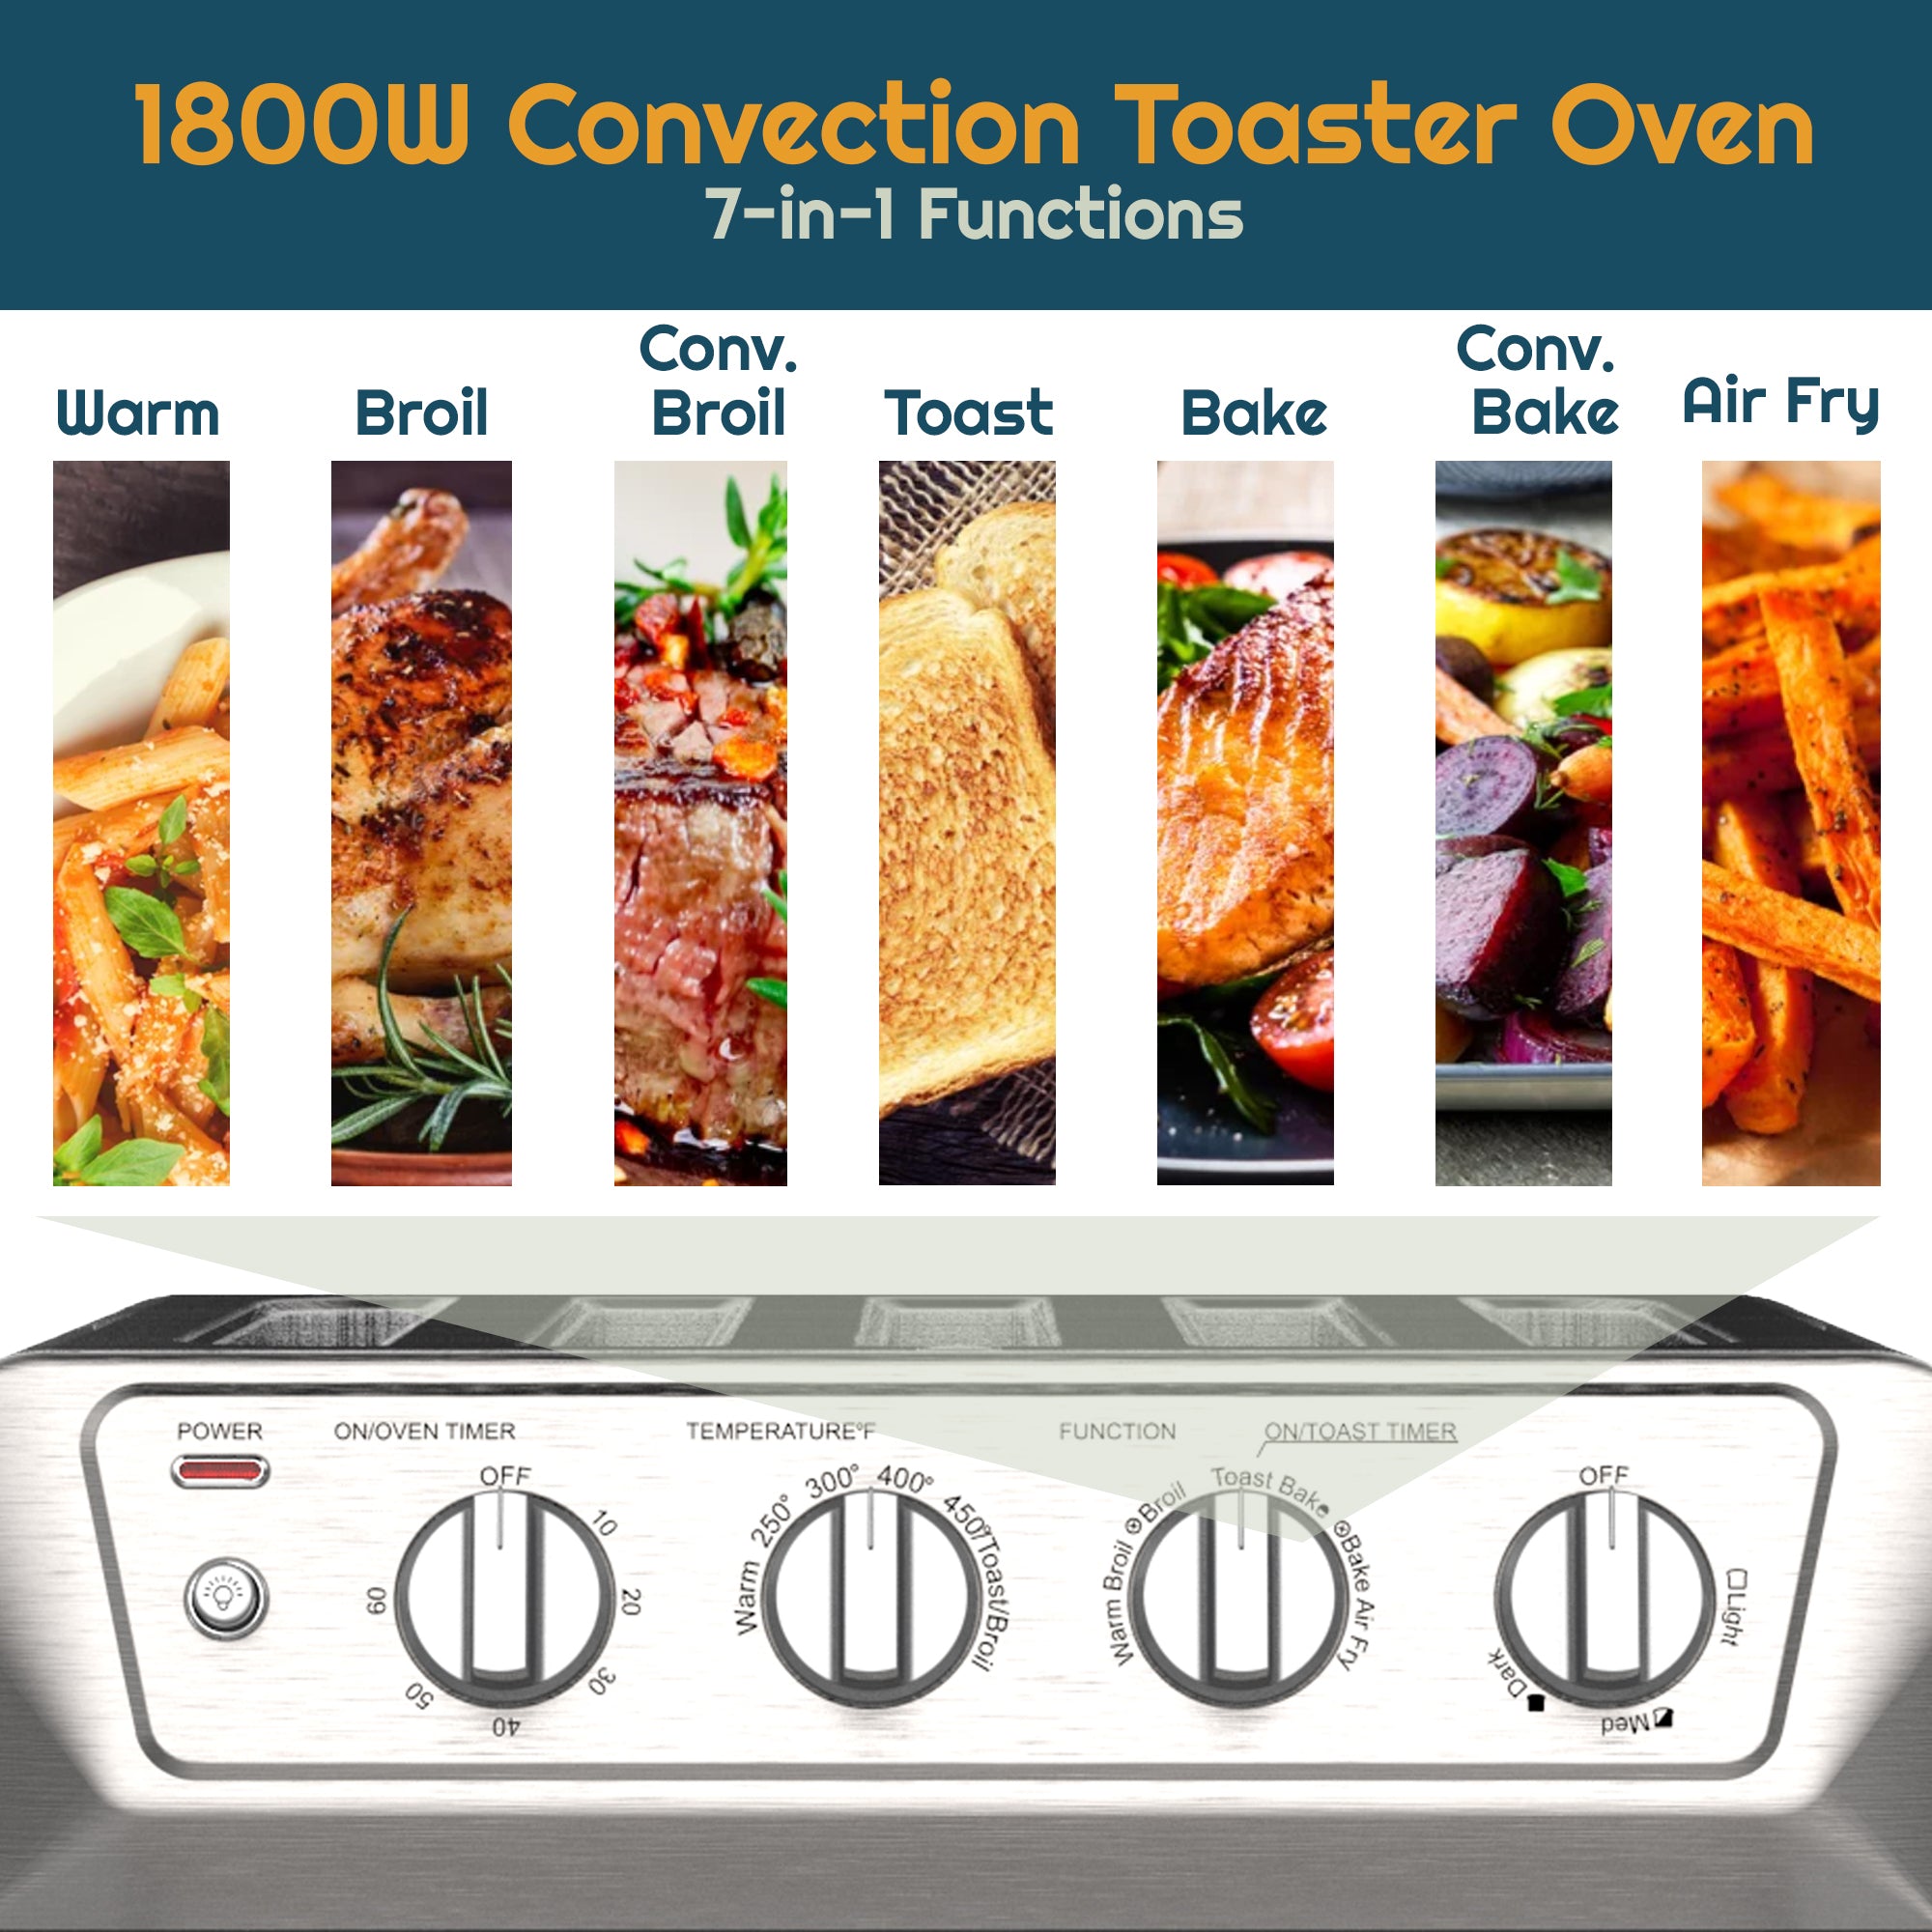 iCucina Digital Air Fryer 10 qt Air Fryer Oven with 8 Cooking Presets and Air Fryer Accessories Chicken Rotisserie Rotating Mesh Basket